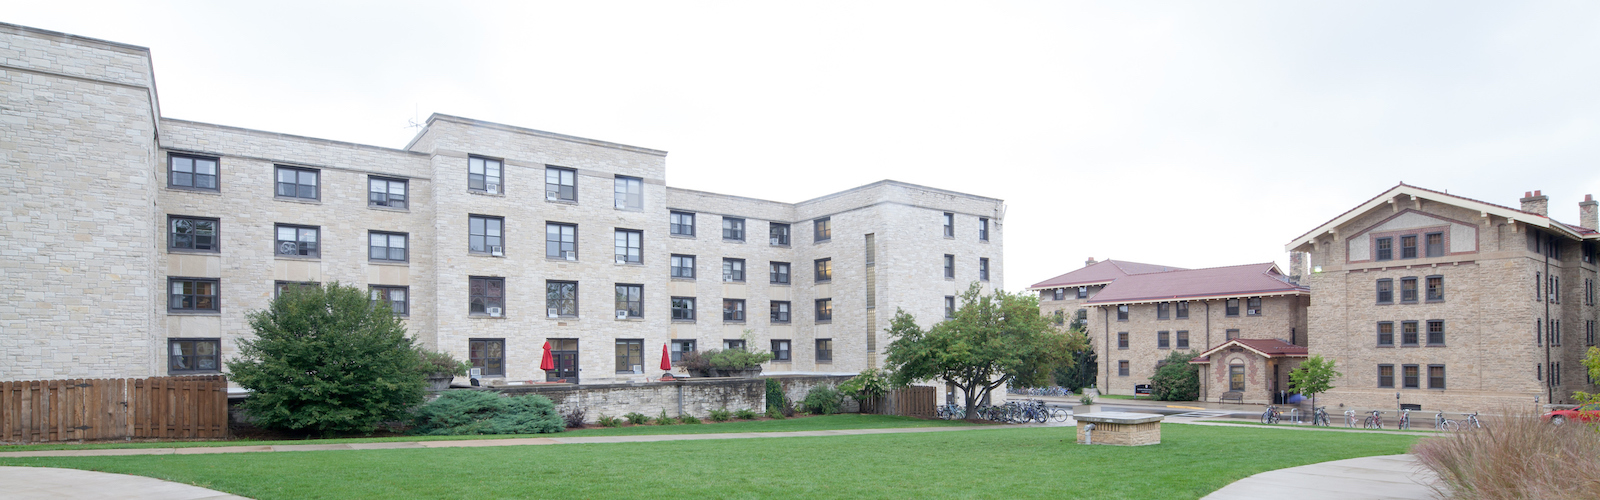 Exterior photo of Slichter and Adams Residence Halls